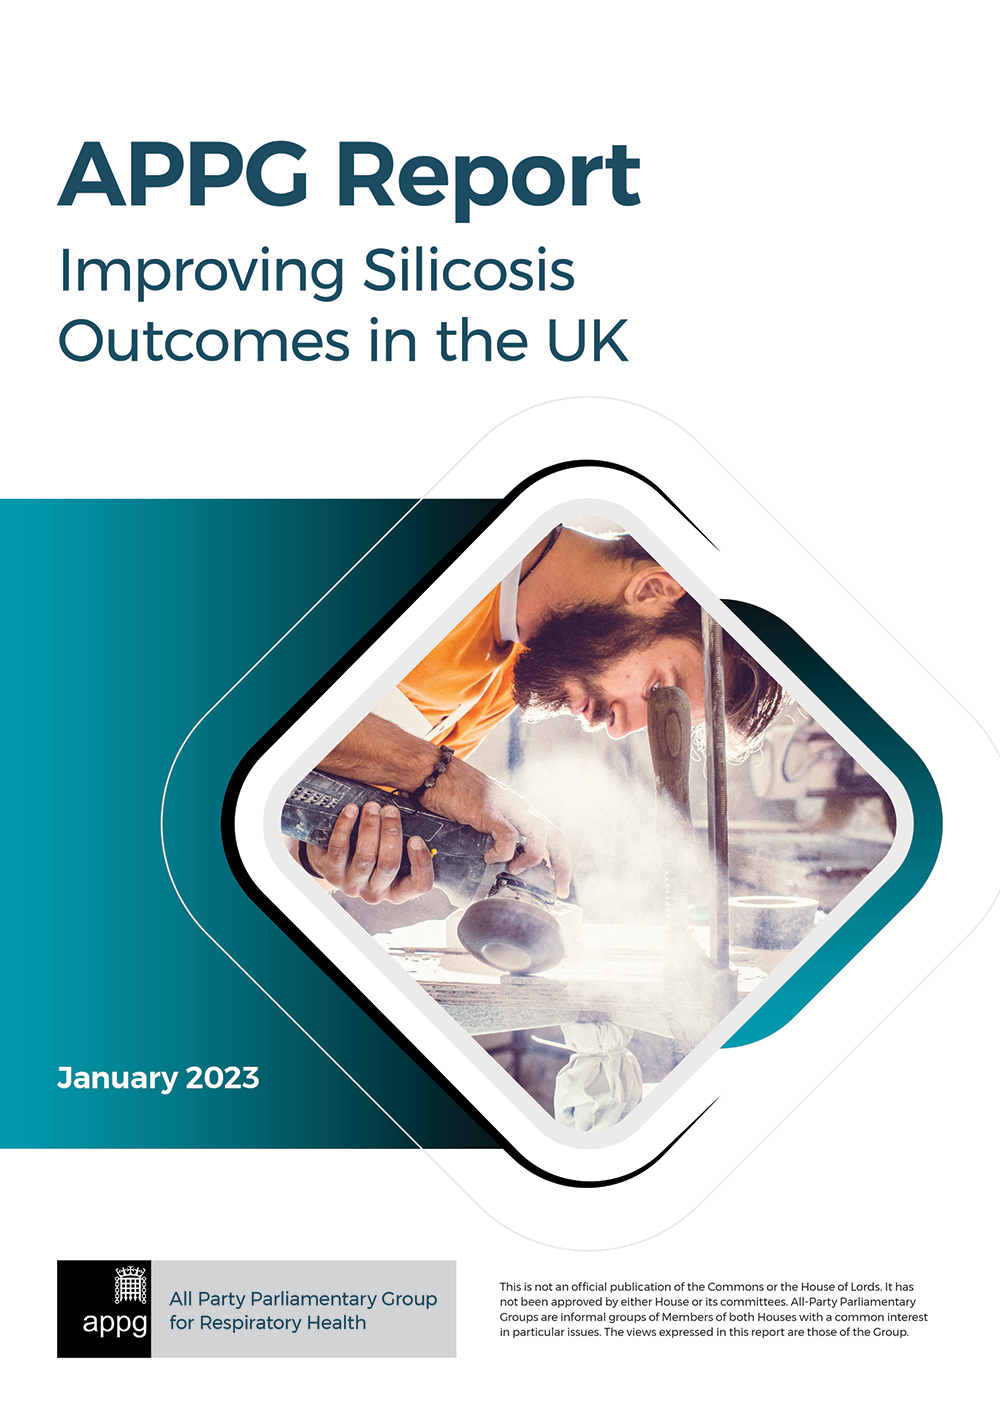 APPG Report on Improving Silicosis Outcomes in the UK